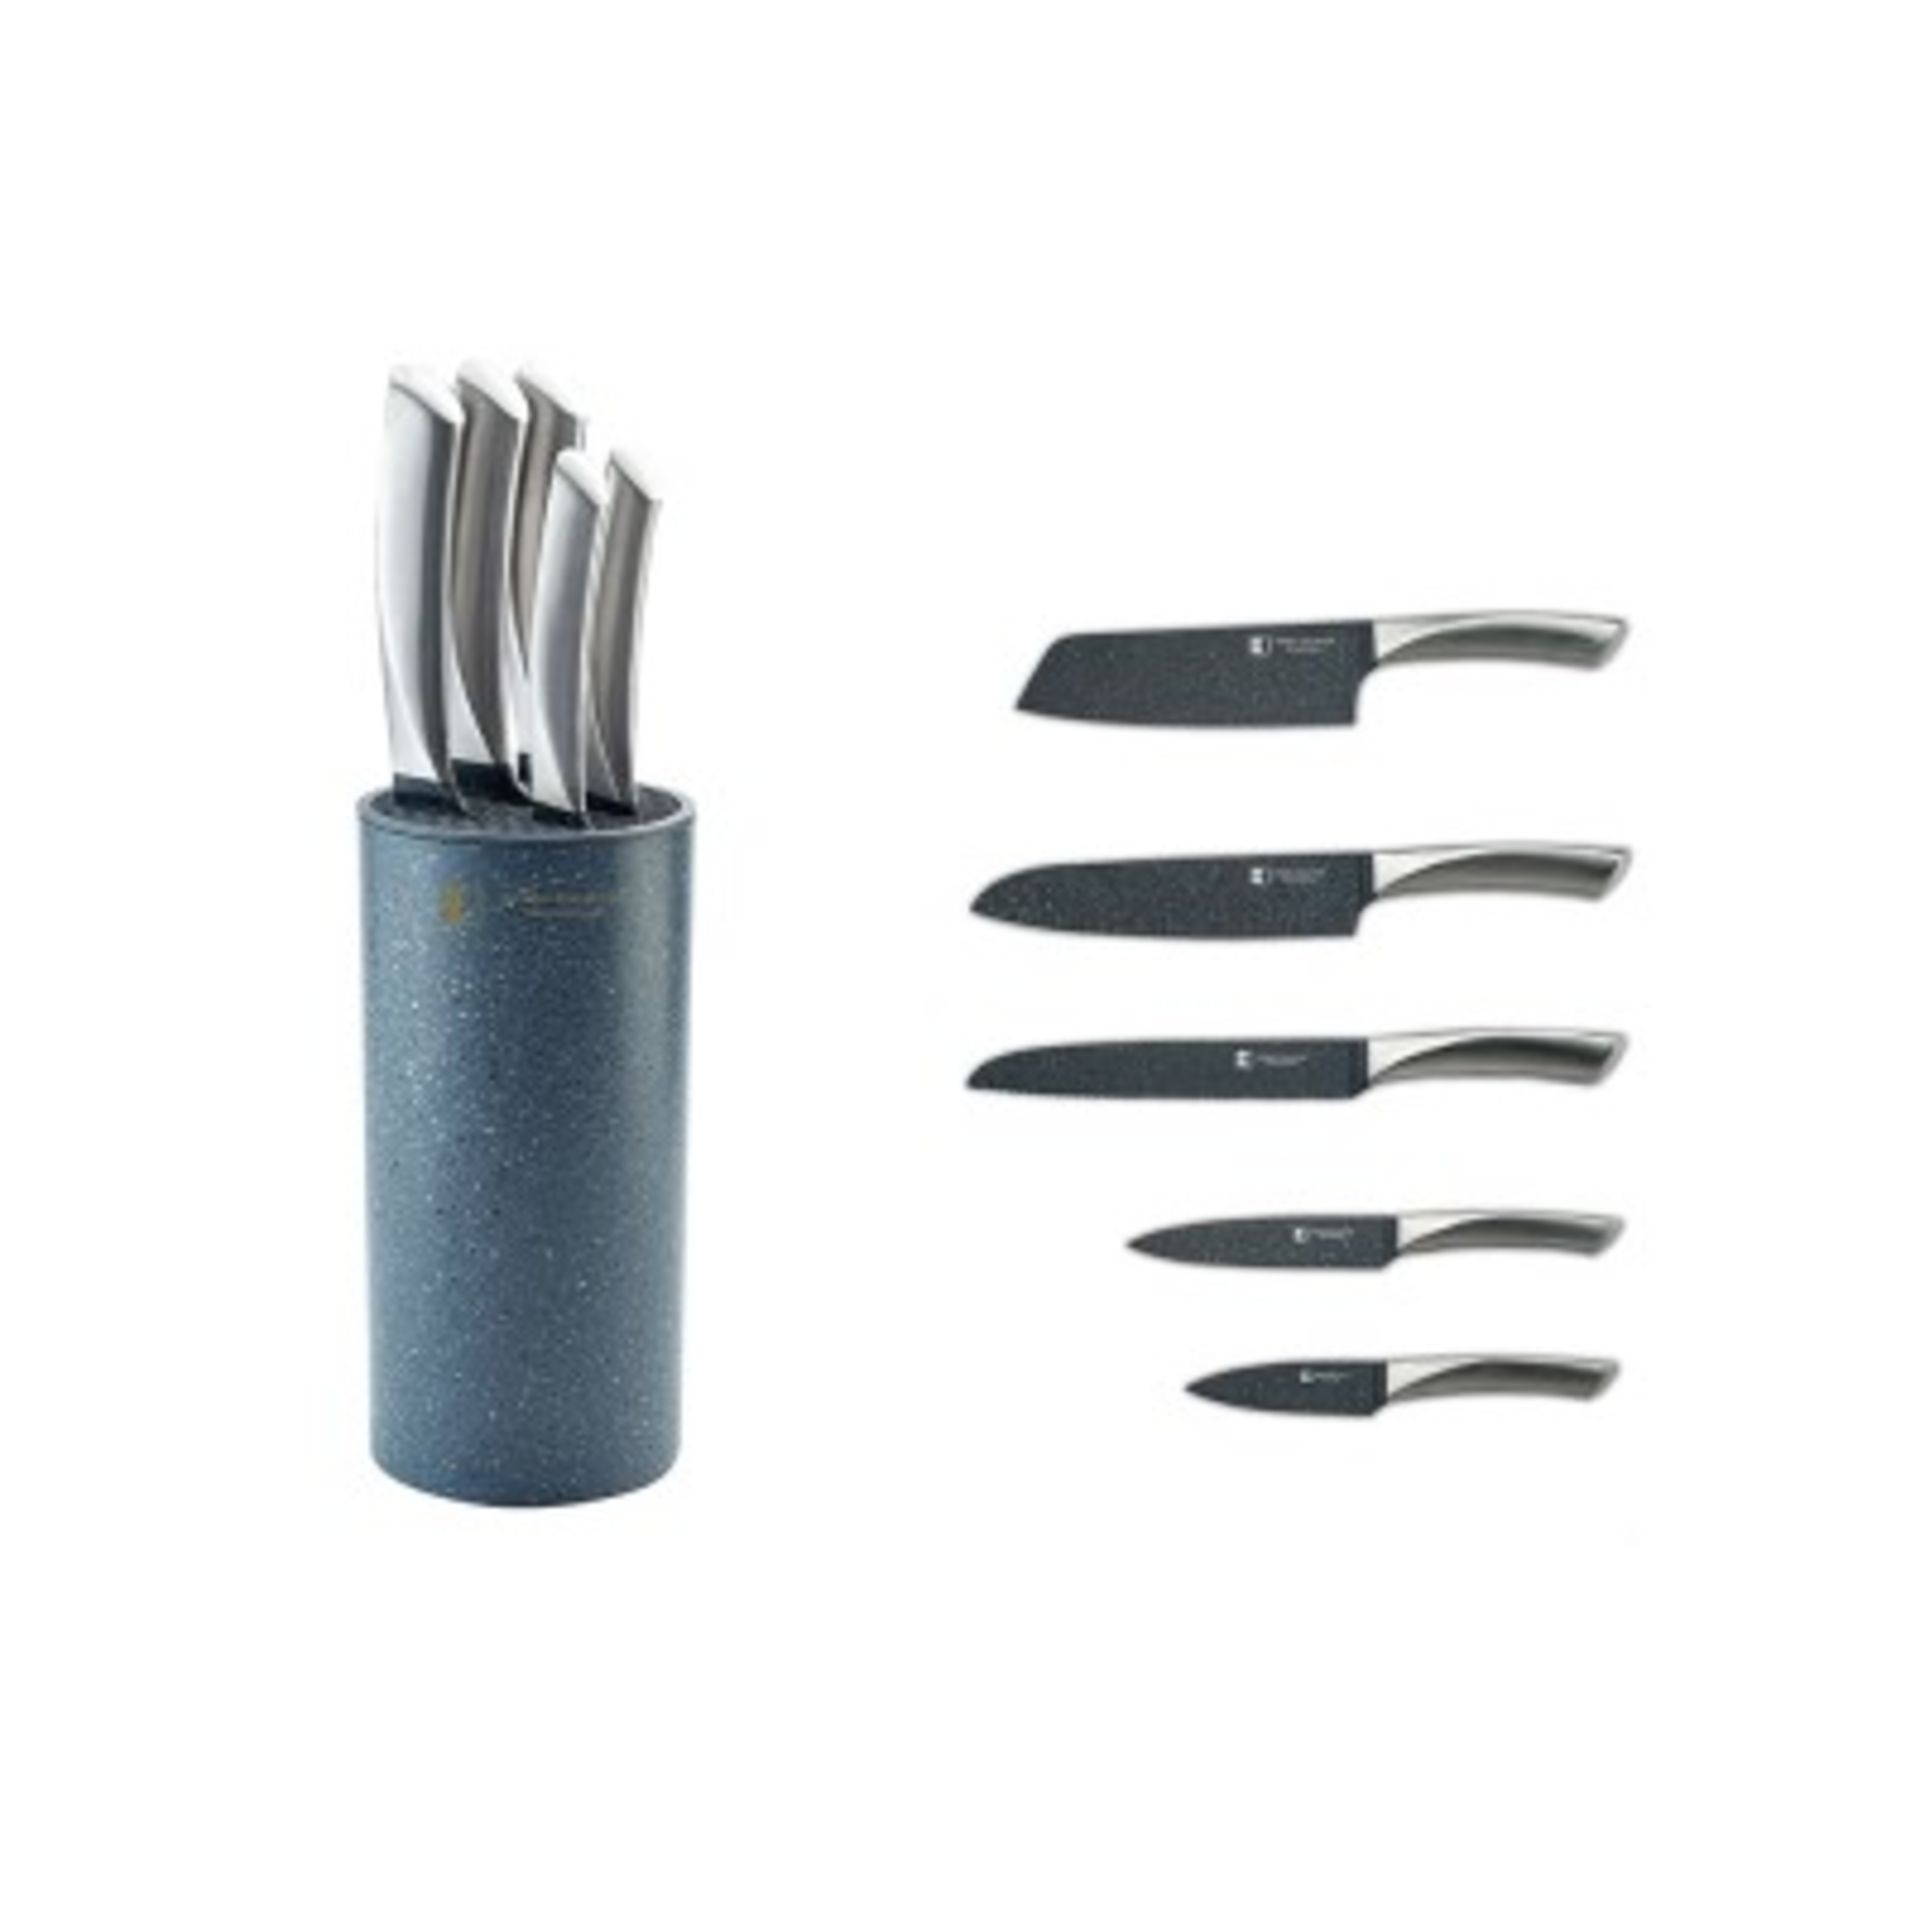 V Brand New Stainless Steel with Marble coating Knife Set In grey marble stlye Holder Includes 6"